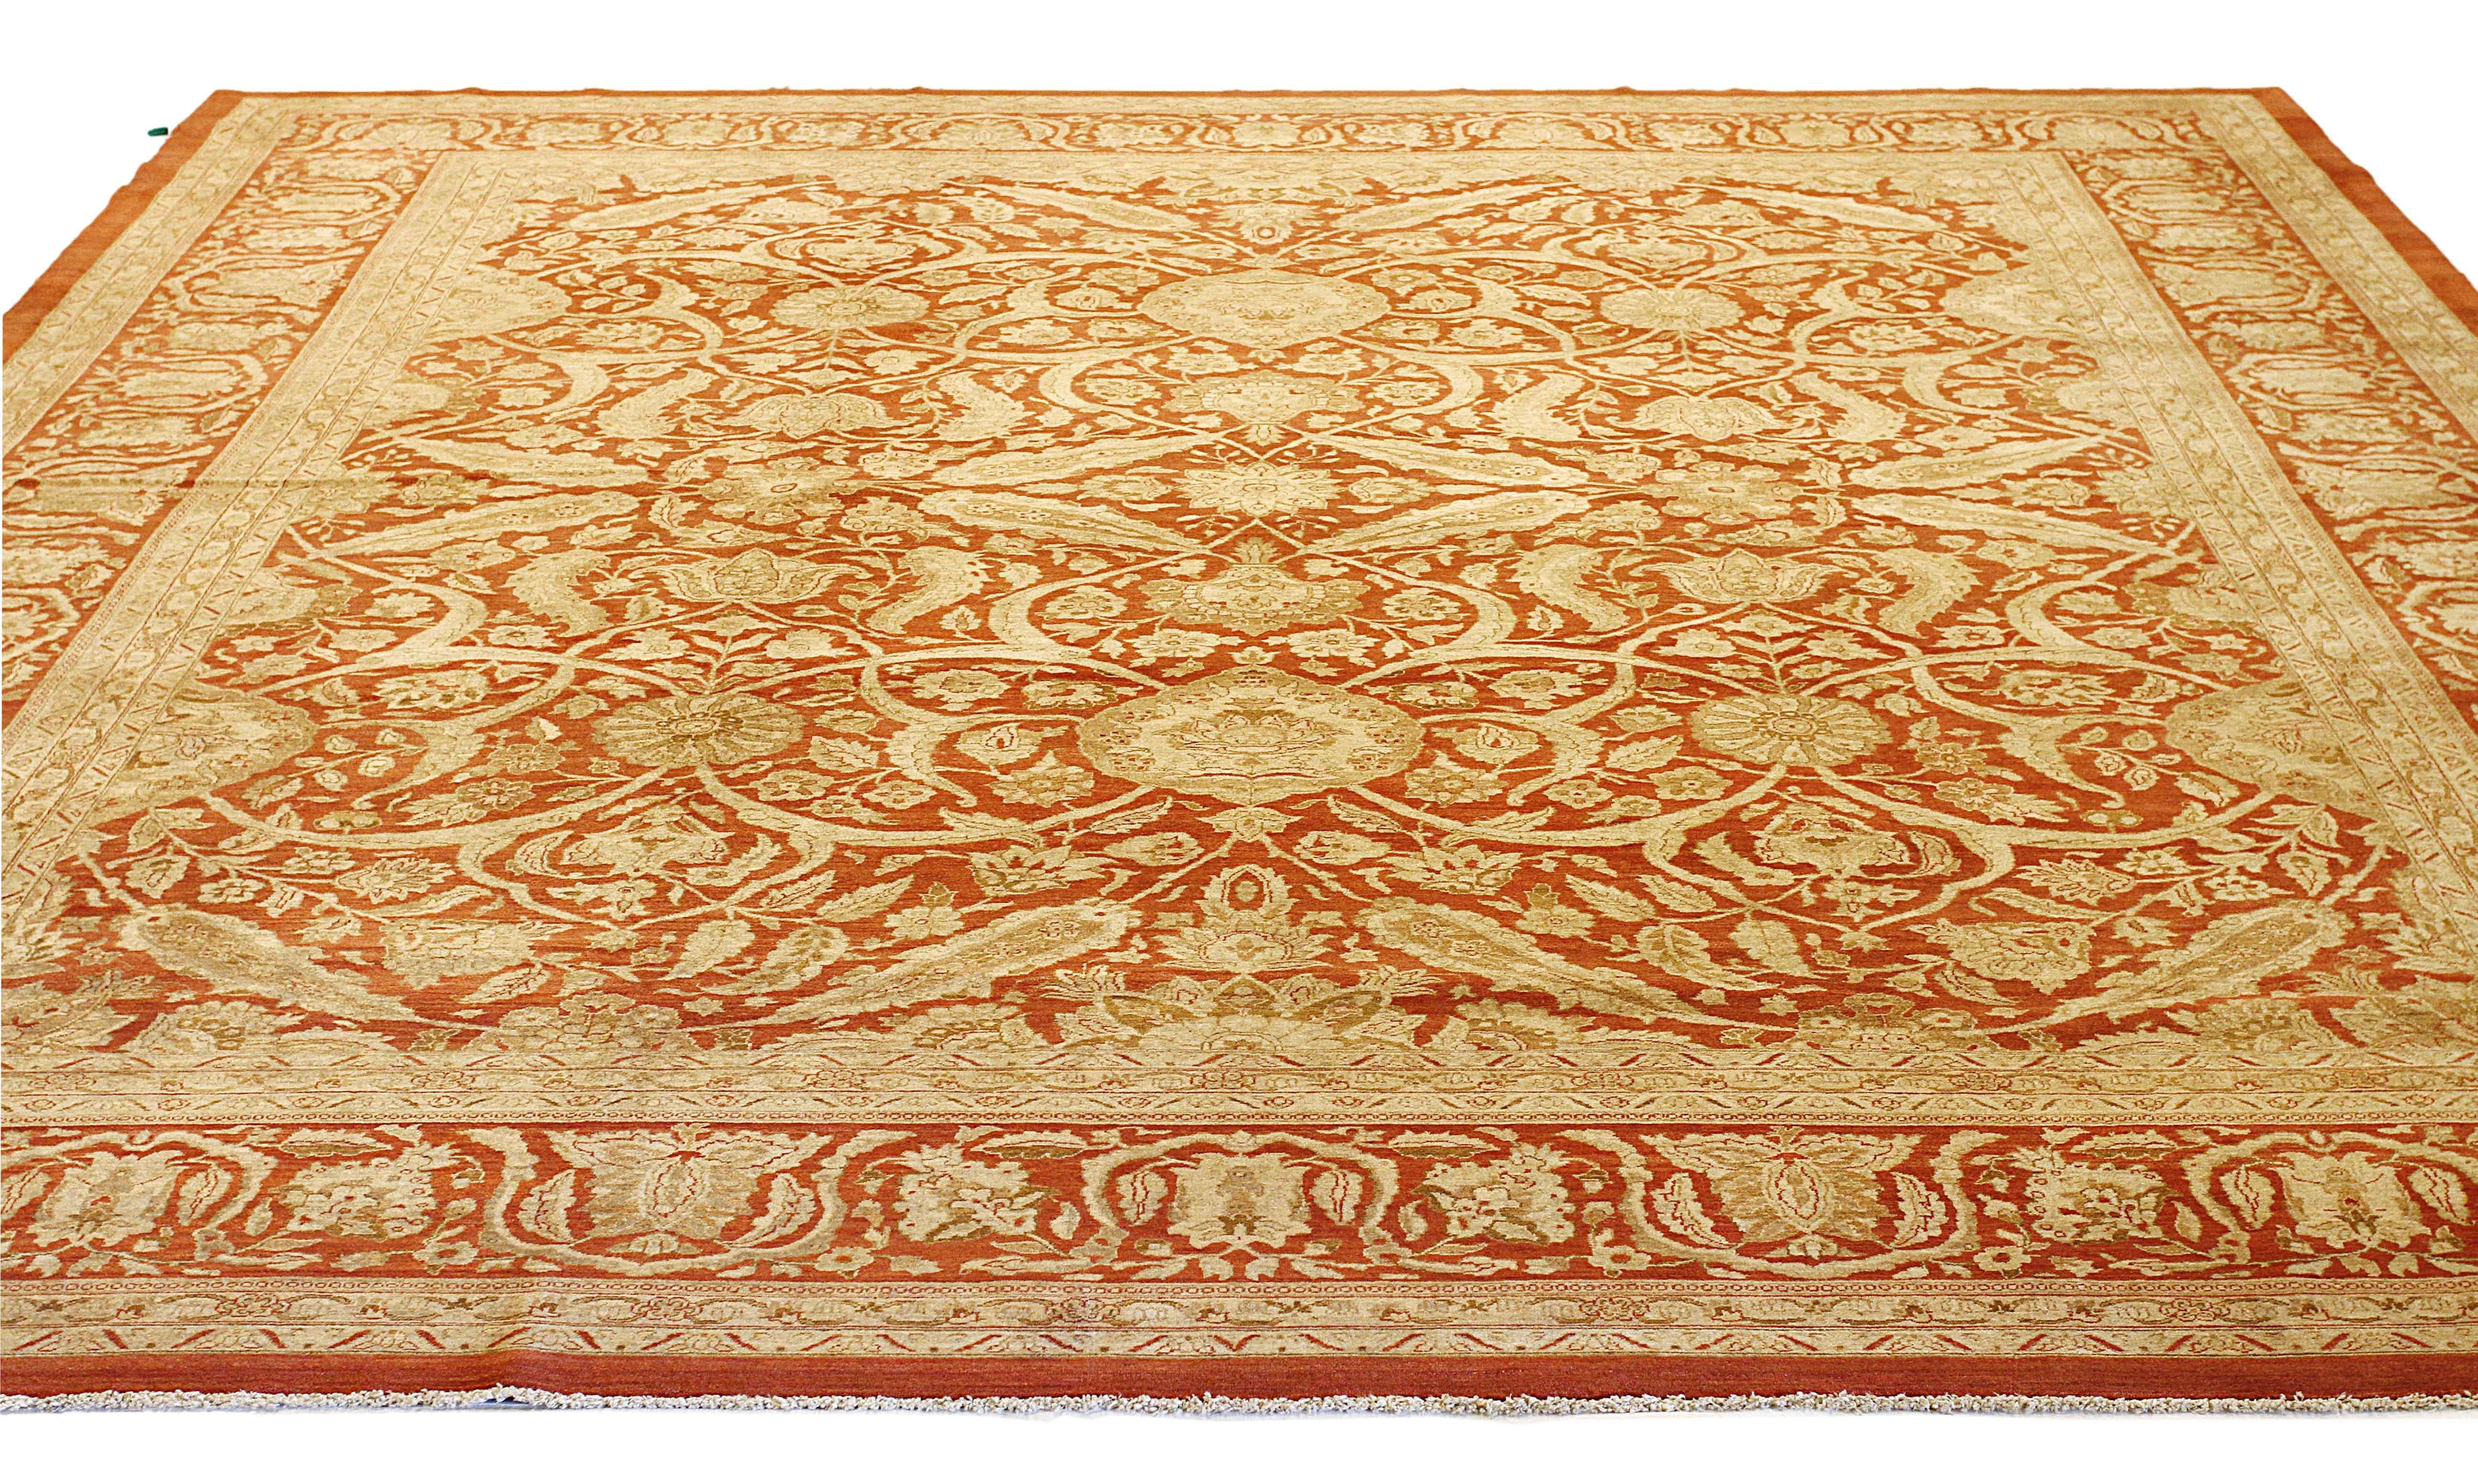 Contemporary Persian rug handwoven from the finest sheep’s wool and colored with all-natural vegetable dyes that are safe for humans and pets. It’s a traditional Tabriz weaving featuring a lovely ensemble of floral designs in beige and ivory over a